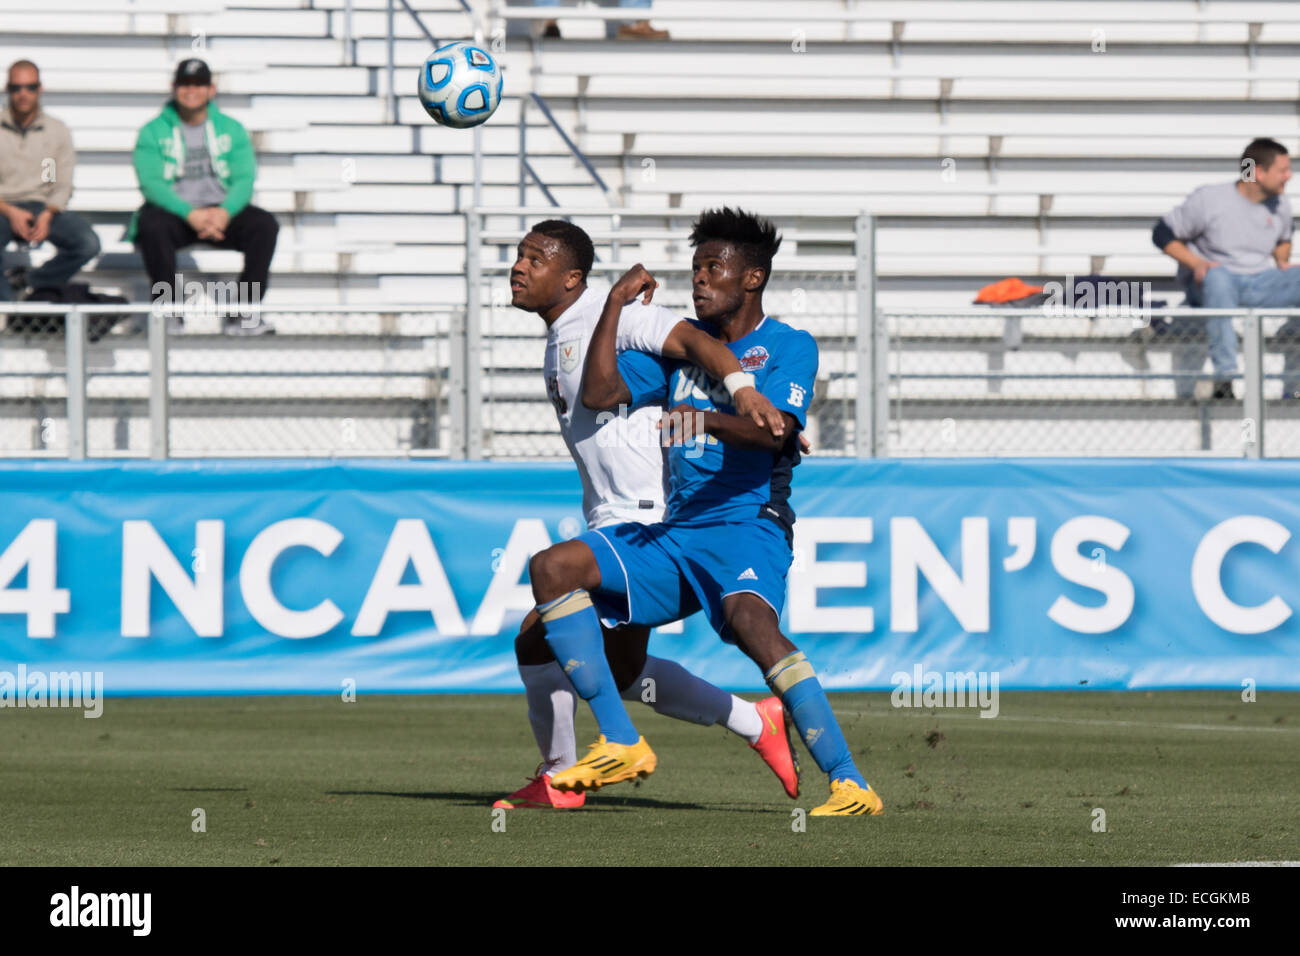 Cary, North Carolina, USA. 14th Dec, 2014. Virginia Cavaliers Defender KYLER SULLIVAN (13) and UCLA Bruins Forward LARRY NDJOCK (11) during the 2014 NCAA College Cup soccer championship match between Virginia and UCLA at WakeMed Soccer Park in Cary, NC. Virginia goes on to win 4 to 2 in PKs. © Jason Walle/ZUMA Wire/Alamy Live News Stock Photo